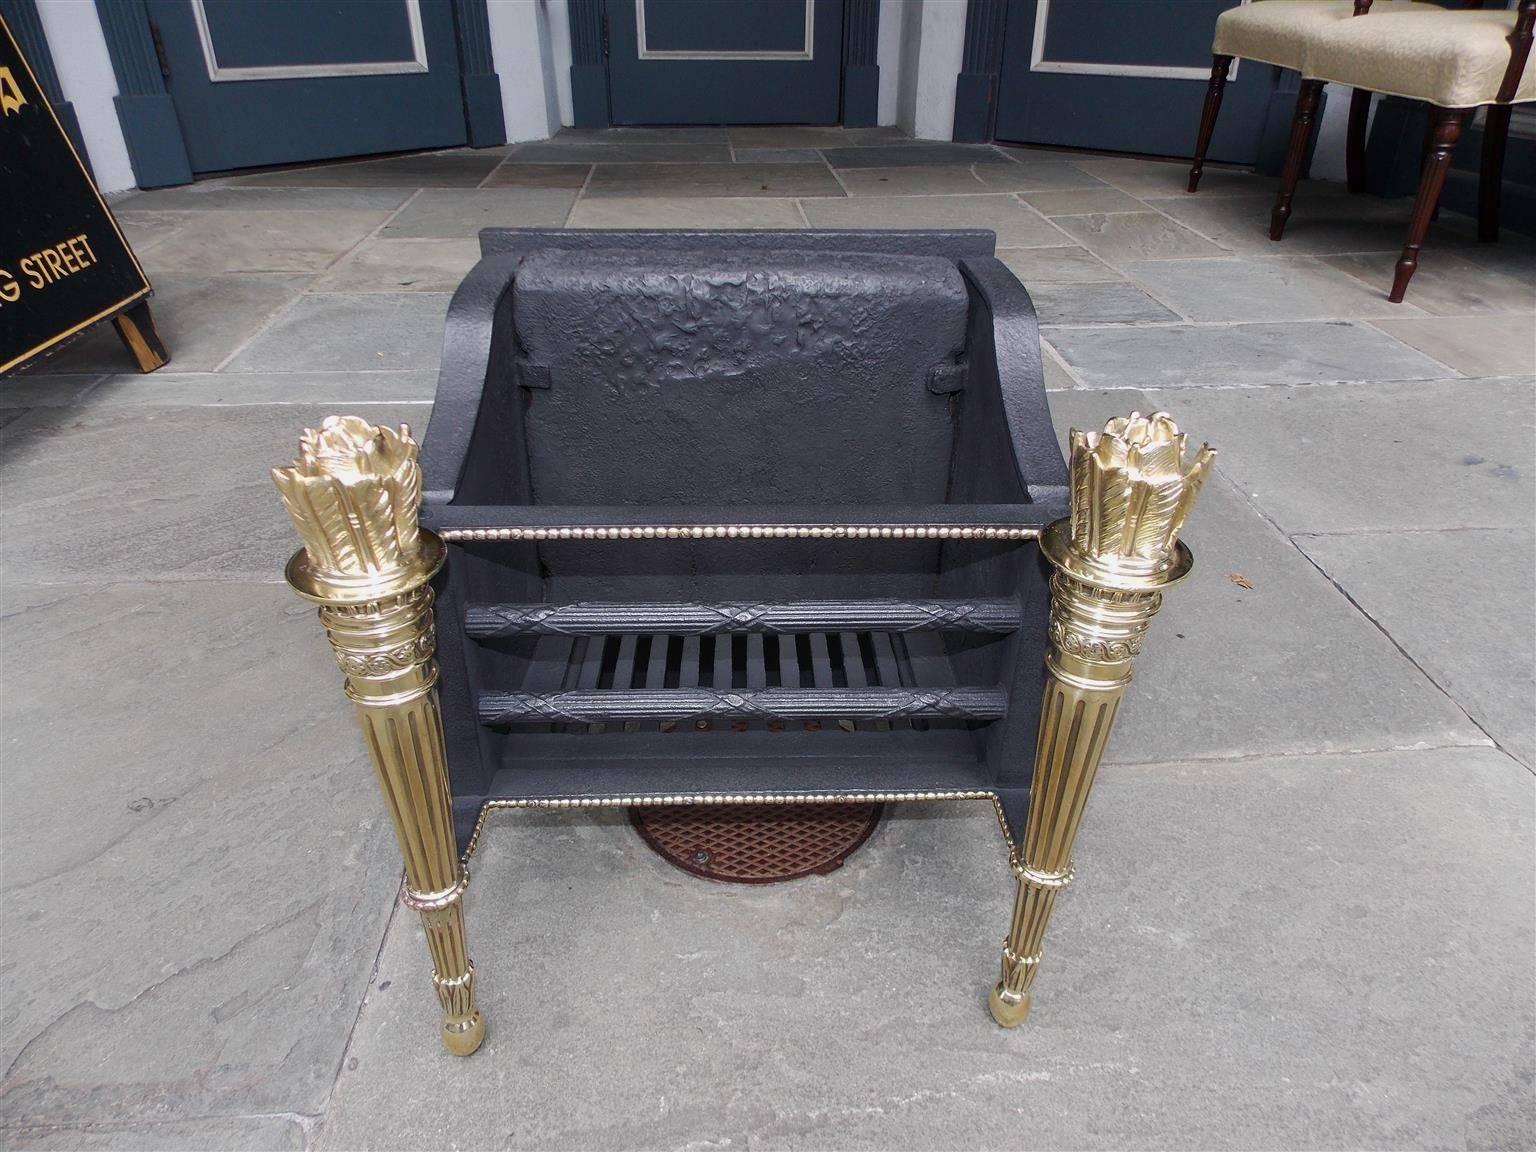 French cast iron and brass coal grate with flanking flame fluted torchieres, elegant double brass row of beading, decorative cross hatching horizontal bars, and fitted with the original interior heat reflector, Early 19th century.